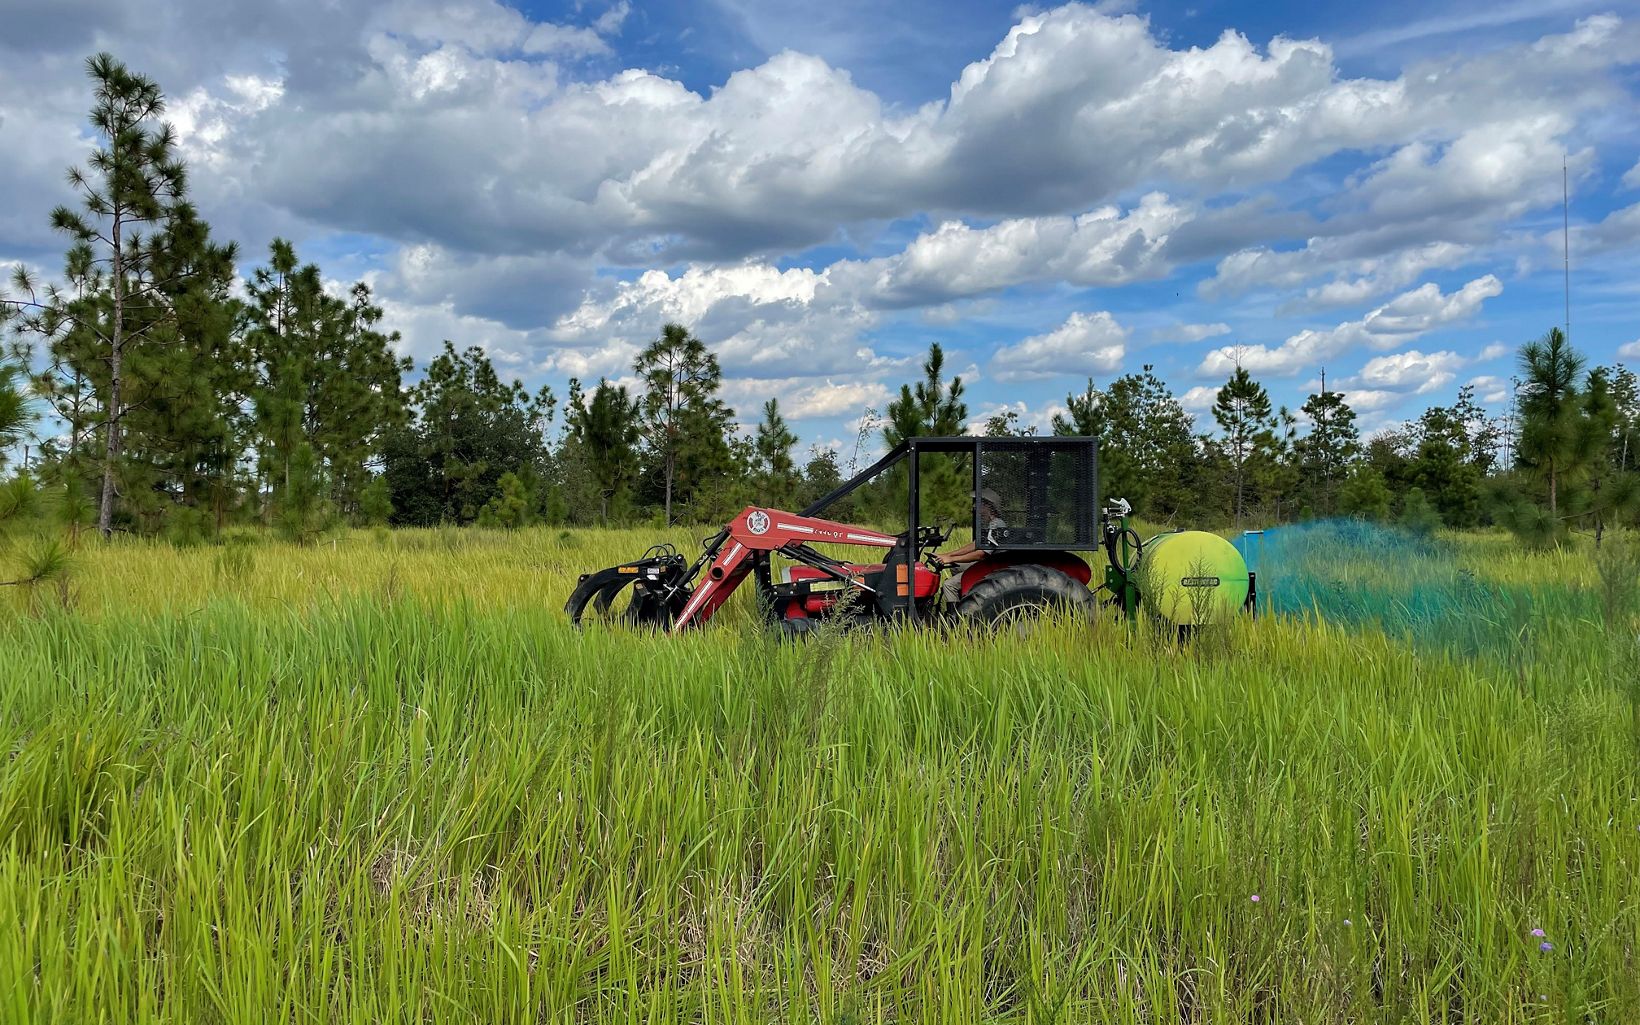 Non-native cogon grass is sprayed on nearby partner lands by a tractor at Apalachicola Bluffs and Ravines Preserve.